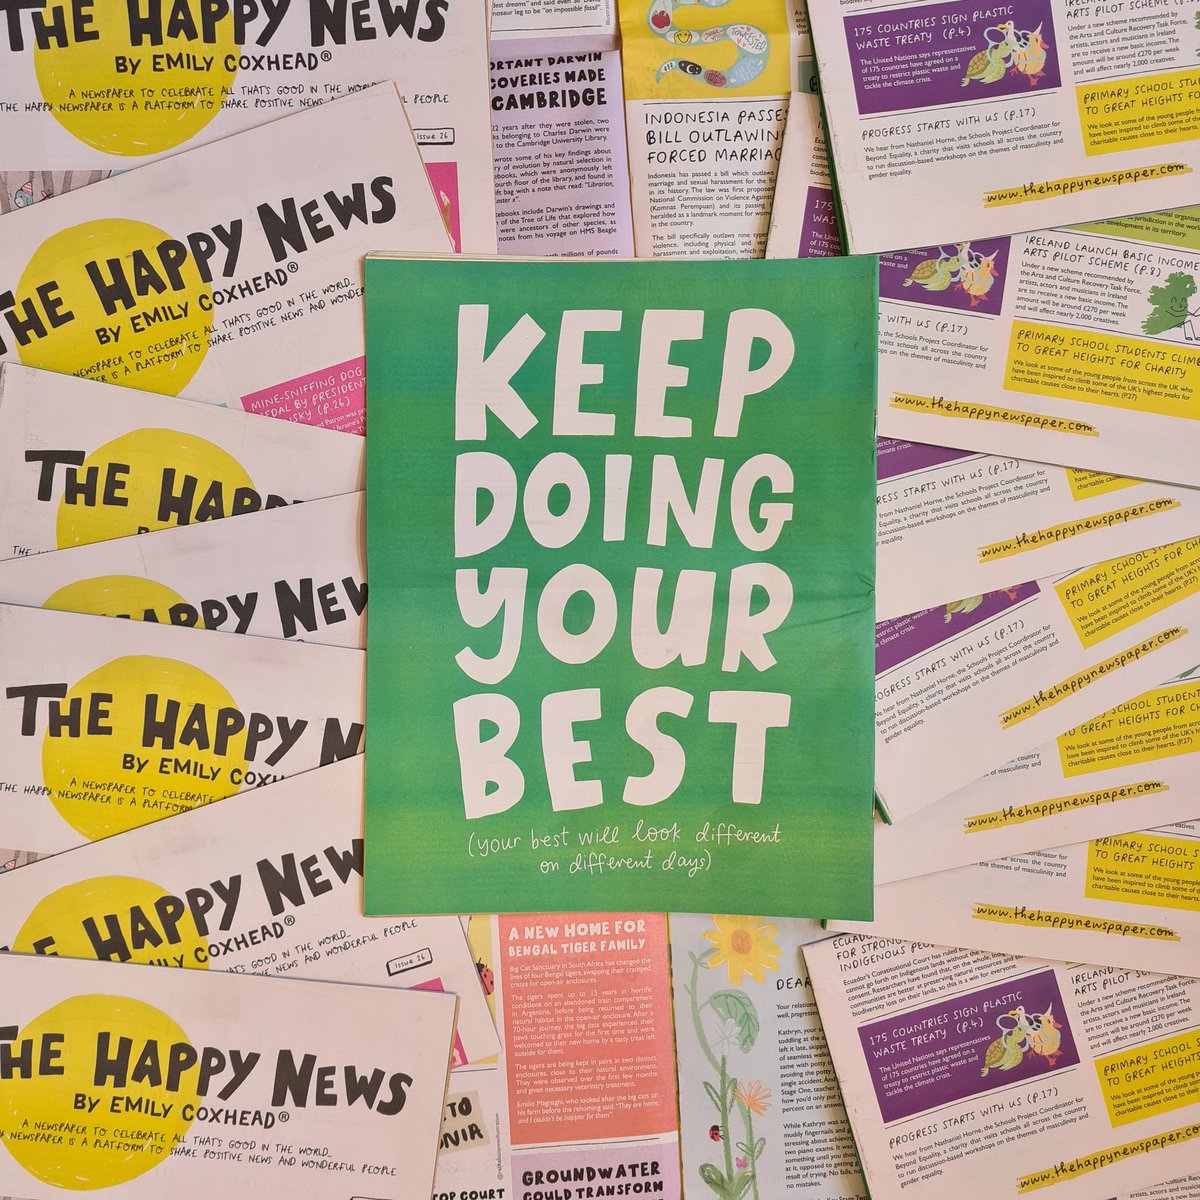 🌞 Happy Friday 🌞 Issue 26 of @HappyNewspaper_ by @emilycoxhead has landed! This issue is a super postive roundup all about *Progress* 🤩 so if you want some good vibes to kick off the weekend you can grab a copy in store or on our new website today! swalkcreative.com/shop/p/the-hap…